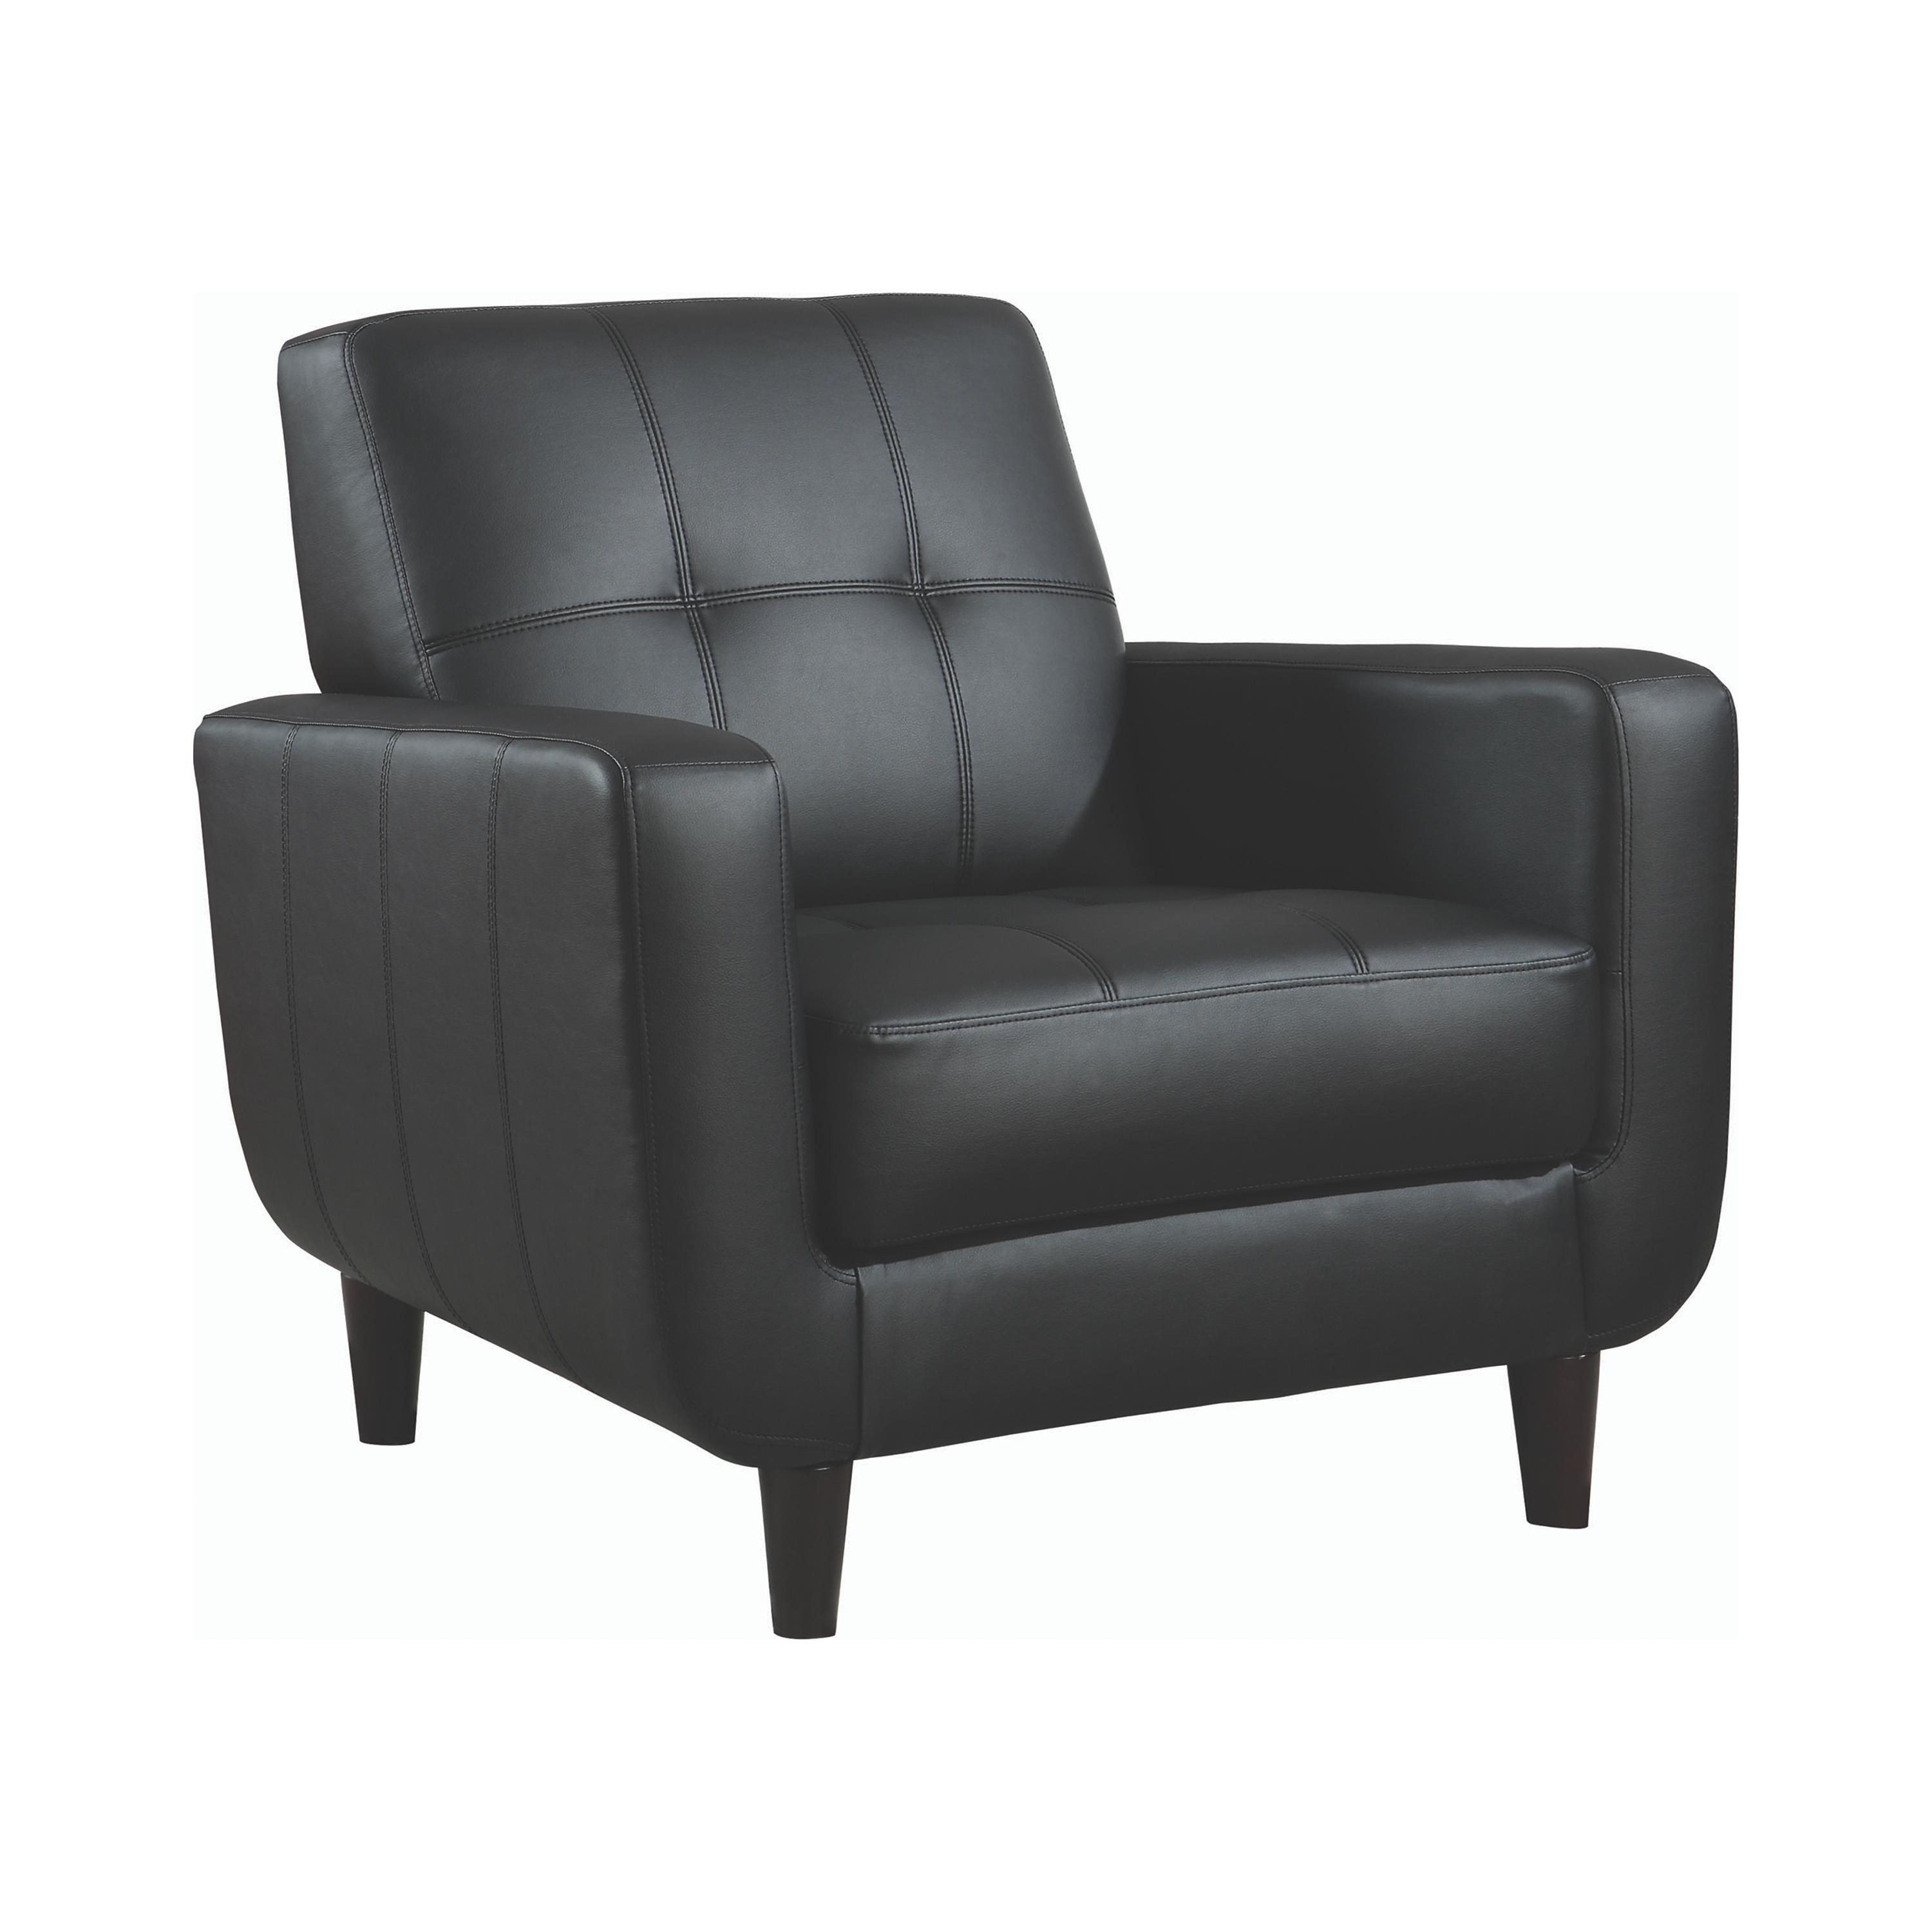 Contemporary Accent Chair 900204 900204 in Black Leatherette